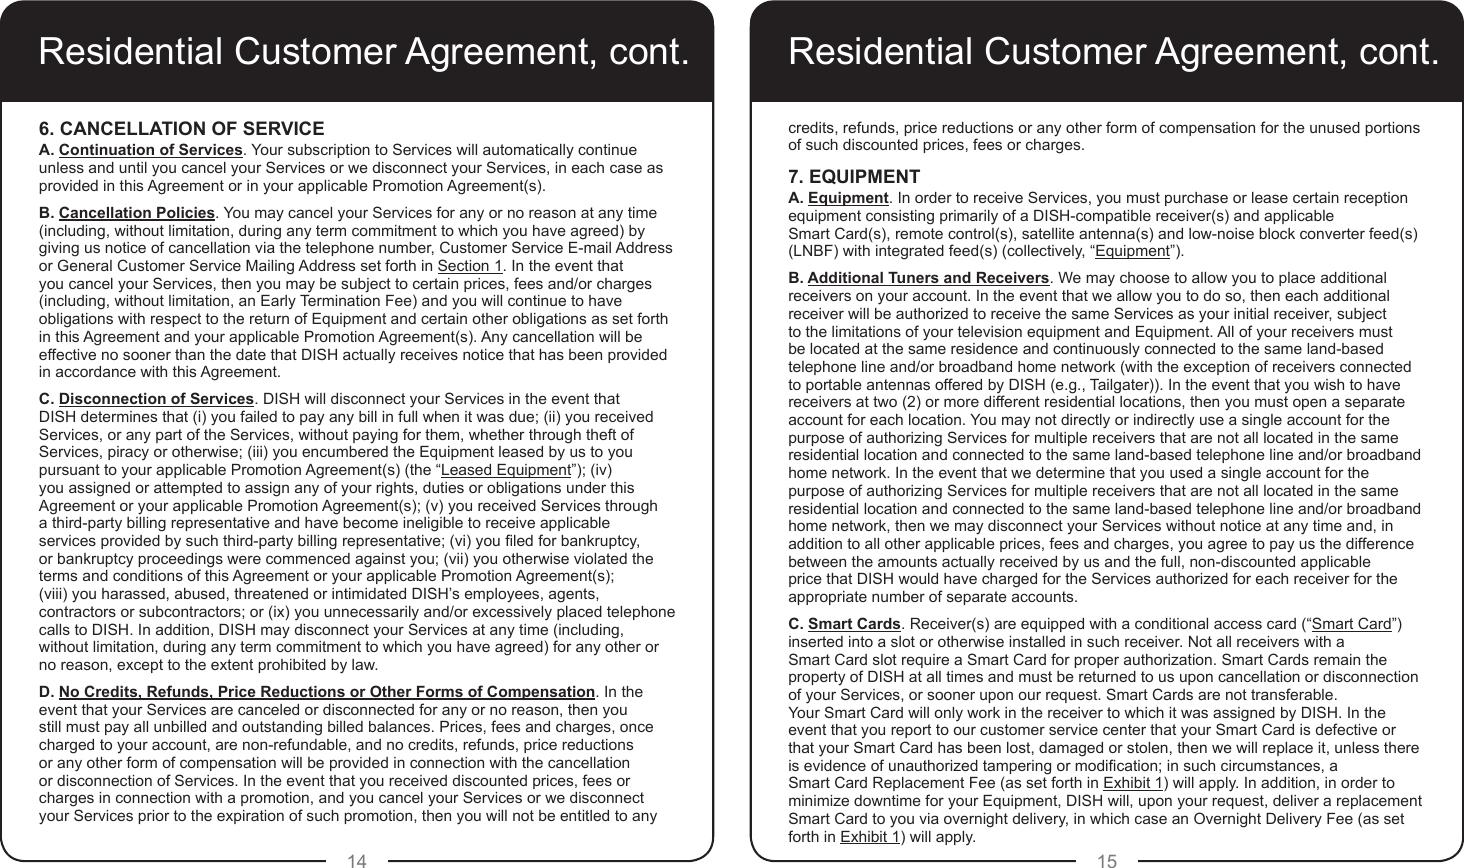 14 15Residential Customer Agreement, cont.6. CANCELLATION OF SERVICE A. Continuation of Services. Your subscription to Services will automatically continue unless and until you cancel your Services or we disconnect your Services, in each case as provided in this Agreement or in your applicable Promotion Agreement(s).B. Cancellation Policies. You may cancel your Services for any or no reason at any time (including, without limitation, during any term commitment to which you have agreed) by giving us notice of cancellation via the telephone number, Customer Service E-mail Address or General Customer Service Mailing Address set forth in Section 1. In the event that you cancel your Services, then you may be subject to certain prices, fees and/or charges (including, without limitation, an Early Termination Fee) and you will continue to have obligations with respect to the return of Equipment and certain other obligations as set forth in this Agreement and your applicable Promotion Agreement(s). Any cancellation will be effective no sooner than the date that DISH actually receives notice that has been provided in accordance with this Agreement.C. Disconnection of Services. DISH will disconnect your Services in the event that DISH determines that (i) you failed to pay any bill in full when it was due; (ii) you received Services, or any part of the Services, without paying for them, whether through theft of Services, piracy or otherwise; (iii) you encumbered the Equipment leased by us to you pursuant to your applicable Promotion Agreement(s) (the “Leased Equipment”); (iv) you assigned or attempted to assign any of your rights, duties or obligations under this Agreement or your applicable Promotion Agreement(s); (v) you received Services through a third-party billing representative and have become ineligible to receive applicable services provided by such third-party billing representative; (vi) you led for bankruptcy, or bankruptcy proceedings were commenced against you; (vii) you otherwise violated the terms and conditions of this Agreement or your applicable Promotion Agreement(s);  (viii) you harassed, abused, threatened or intimidated DISH’s employees, agents, contractors or subcontractors; or (ix) you unnecessarily and/or excessively placed telephone calls to DISH. In addition, DISH may disconnect your Services at any time (including, without limitation, during any term commitment to which you have agreed) for any other or no reason, except to the extent prohibited by law.D. No Credits, Refunds, Price Reductions or Other Forms of Compensation. In the event that your Services are canceled or disconnected for any or no reason, then you still must pay all unbilled and outstanding billed balances. Prices, fees and charges, once charged to your account, are non-refundable, and no credits, refunds, price reductions or any other form of compensation will be provided in connection with the cancellation or disconnection of Services. In the event that you received discounted prices, fees or charges in connection with a promotion, and you cancel your Services or we disconnect your Services prior to the expiration of such promotion, then you will not be entitled to any Residential Customer Agreement, cont.credits, refunds, price reductions or any other form of compensation for the unused portions of such discounted prices, fees or charges.7. EQUIPMENTA. Equipment. In order to receive Services, you must purchase or lease certain reception equipment consisting primarily of a DISH-compatible receiver(s) and applicable  Smart Card(s), remote control(s), satellite antenna(s) and low-noise block converter feed(s) (LNBF) with integrated feed(s) (collectively, “Equipment”). B. Additional Tuners and Receivers. We may choose to allow you to place additional receivers on your account. In the event that we allow you to do so, then each additional receiver will be authorized to receive the same Services as your initial receiver, subject to the limitations of your television equipment and Equipment. All of your receivers must be located at the same residence and continuously connected to the same land-based telephone line and/or broadband home network (with the exception of receivers connected to portable antennas offered by DISH (e.g., Tailgater)). In the event that you wish to have receivers at two (2) or more different residential locations, then you must open a separate account for each location. You may not directly or indirectly use a single account for the purpose of authorizing Services for multiple receivers that are not all located in the same residential location and connected to the same land-based telephone line and/or broadband home network. In the event that we determine that you used a single account for the purpose of authorizing Services for multiple receivers that are not all located in the same residential location and connected to the same land-based telephone line and/or broadband home network, then we may disconnect your Services without notice at any time and, in addition to all other applicable prices, fees and charges, you agree to pay us the difference between the amounts actually received by us and the full, non-discounted applicable price that DISH would have charged for the Services authorized for each receiver for the appropriate number of separate accounts.C. Smart Cards. Receiver(s) are equipped with a conditional access card (“Smart Card”) inserted into a slot or otherwise installed in such receiver. Not all receivers with a  Smart Card slot require a Smart Card for proper authorization. Smart Cards remain the property of DISH at all times and must be returned to us upon cancellation or disconnection of your Services, or sooner upon our request. Smart Cards are not transferable.  Your Smart Card will only work in the receiver to which it was assigned by DISH. In the event that you report to our customer service center that your Smart Card is defective or that your Smart Card has been lost, damaged or stolen, then we will replace it, unless there is evidence of unauthorized tampering or modication; in such circumstances, a  Smart Card Replacement Fee (as set forth in Exhibit 1) will apply. In addition, in order to minimize downtime for your Equipment, DISH will, upon your request, deliver a replacement Smart Card to you via overnight delivery, in which case an Overnight Delivery Fee (as set forth in Exhibit 1) will apply.